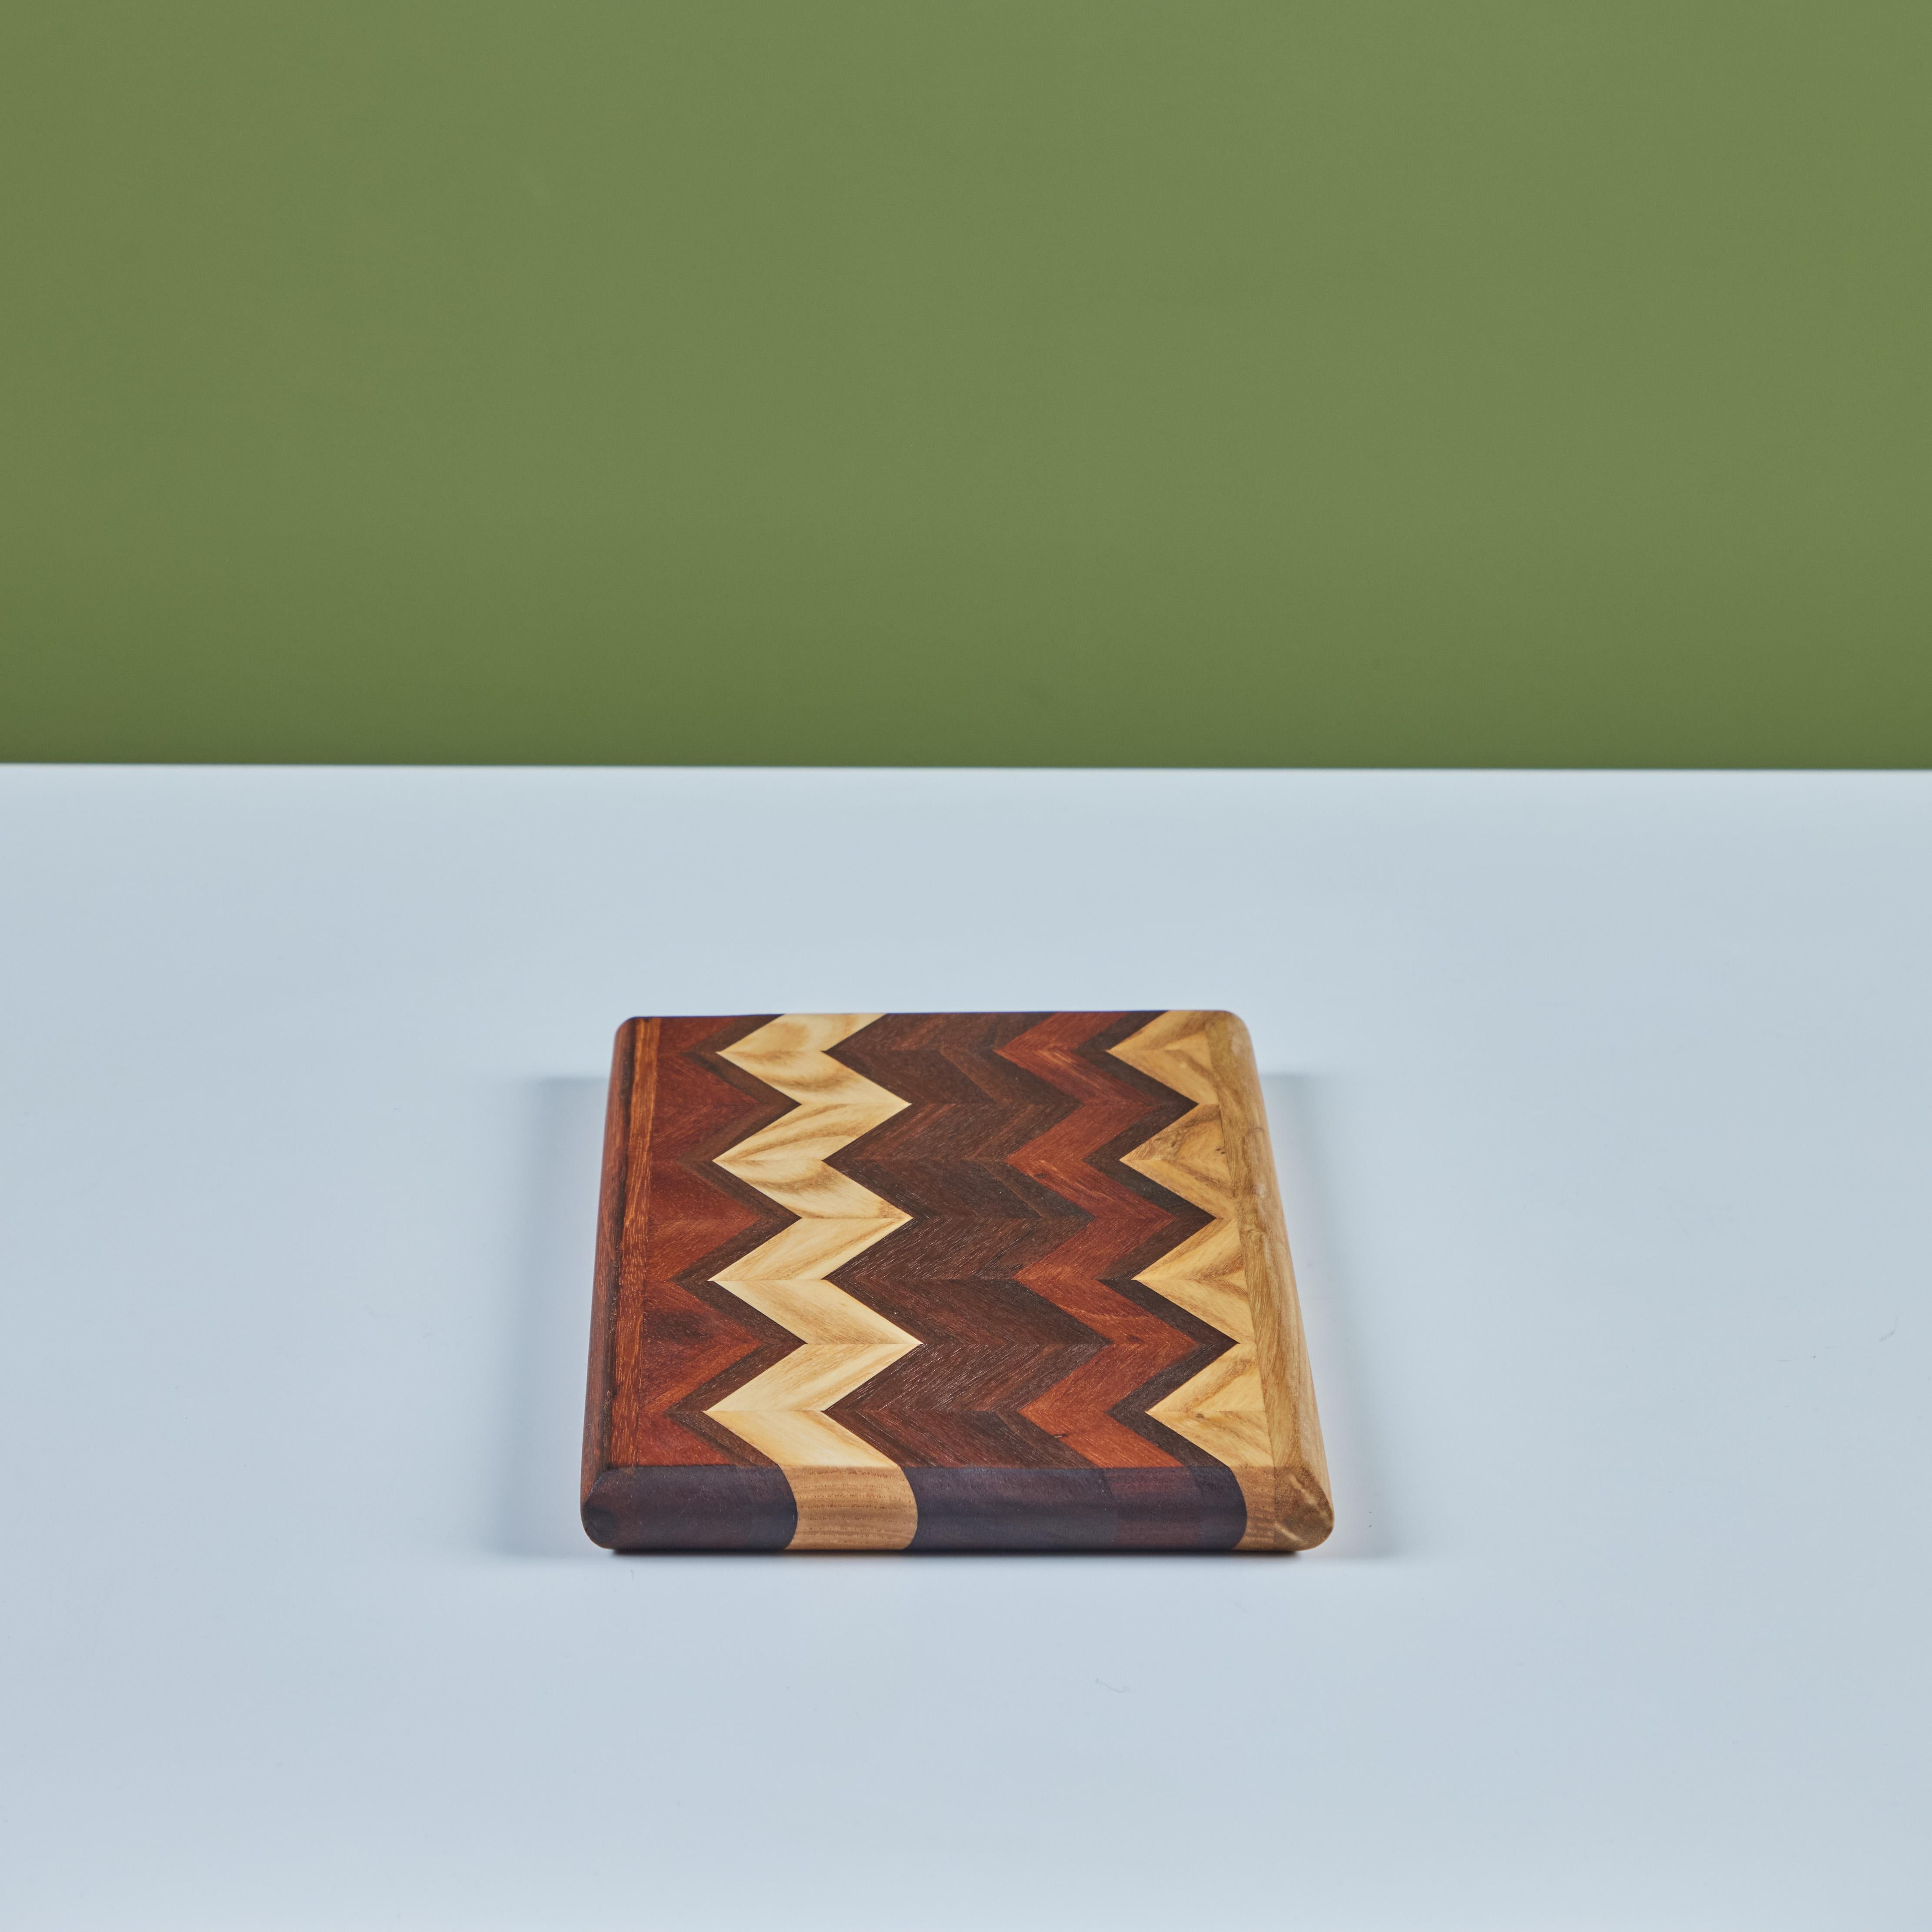 Don Shoemaker Wood Inlaid Chevron Pattern Cutting Board for Señal In Excellent Condition For Sale In Los Angeles, CA